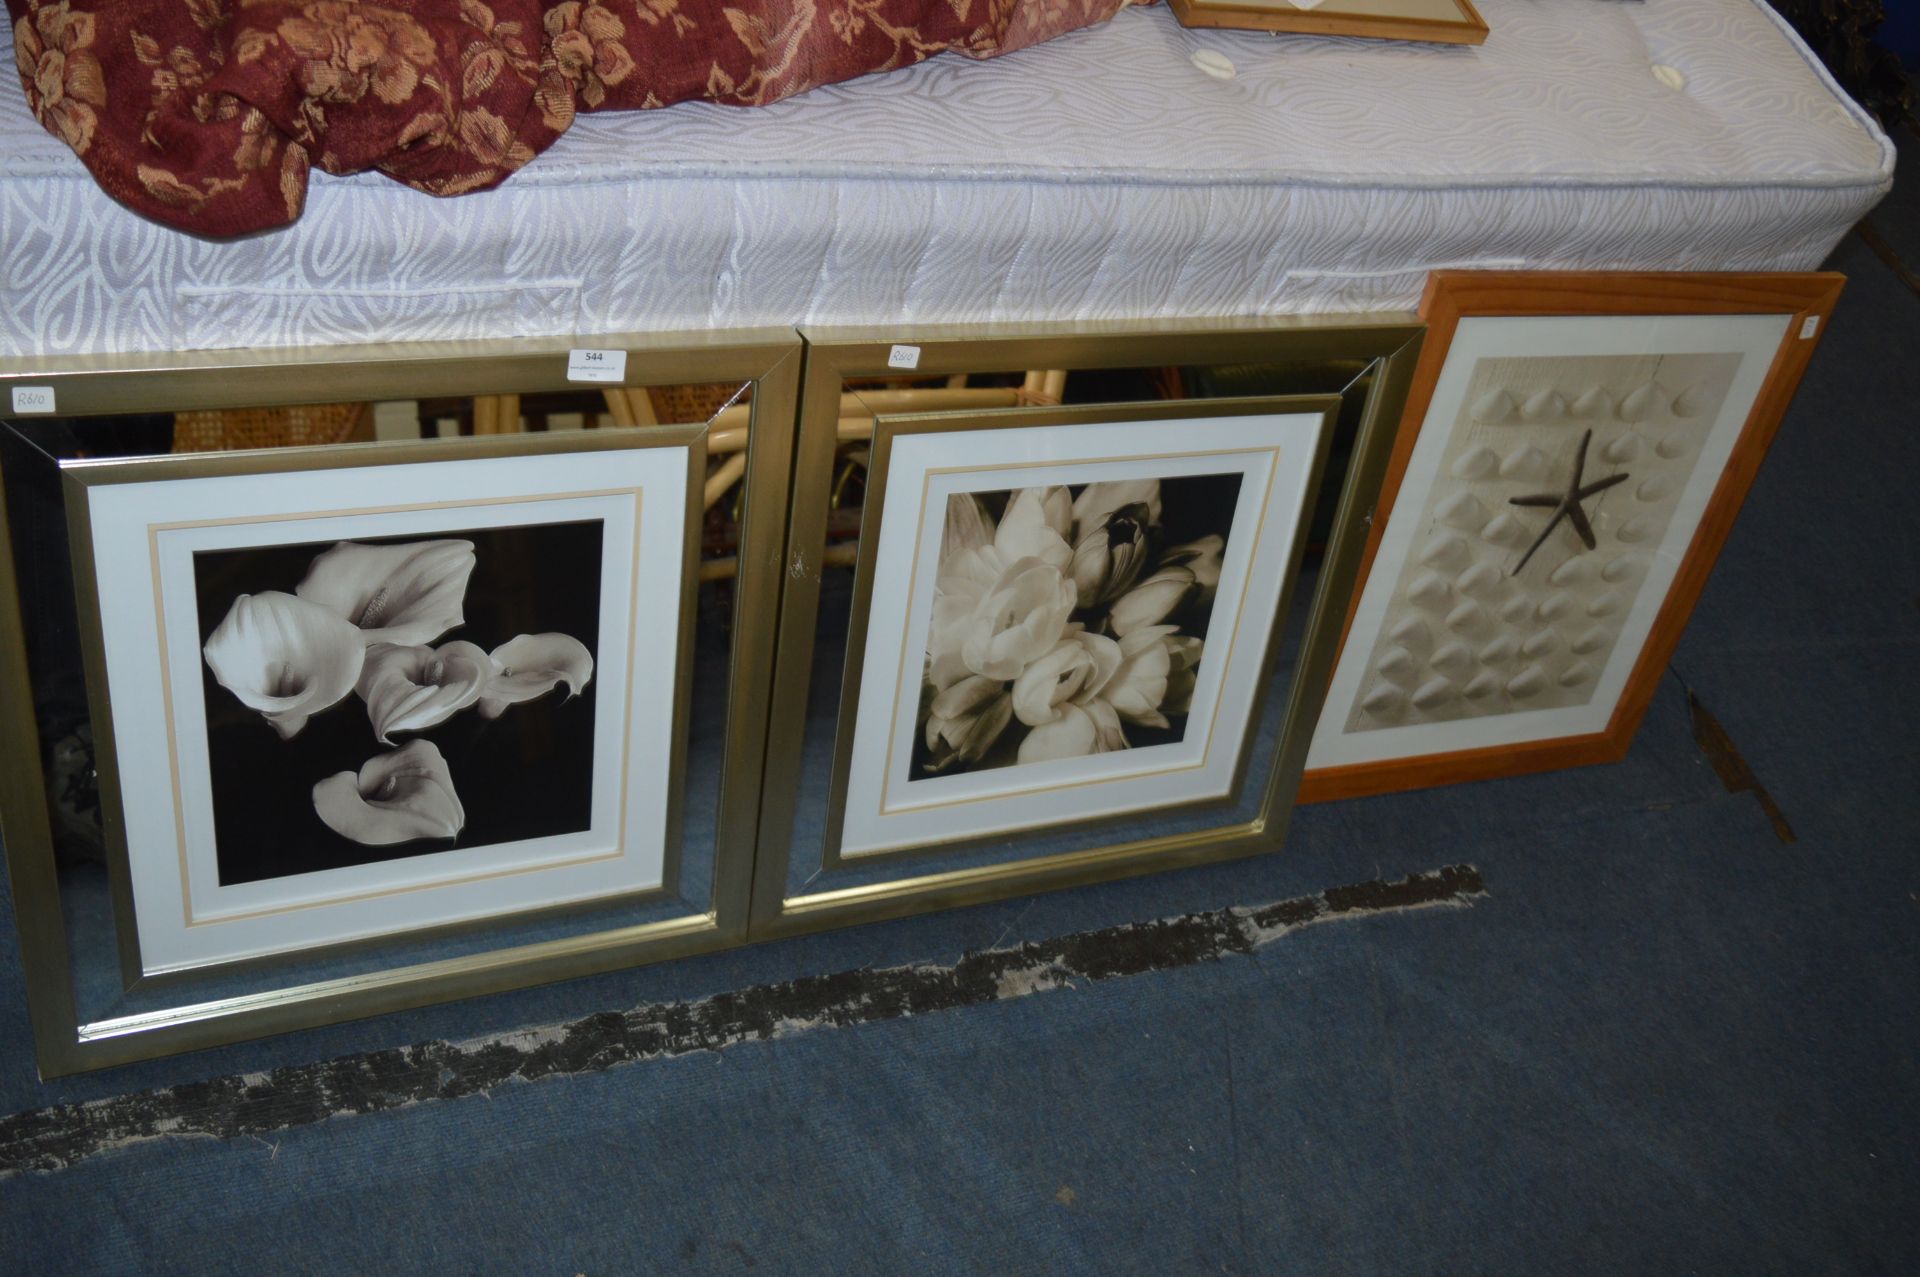 Pair of Gilt and Mirrored Framed Prints - Flowers